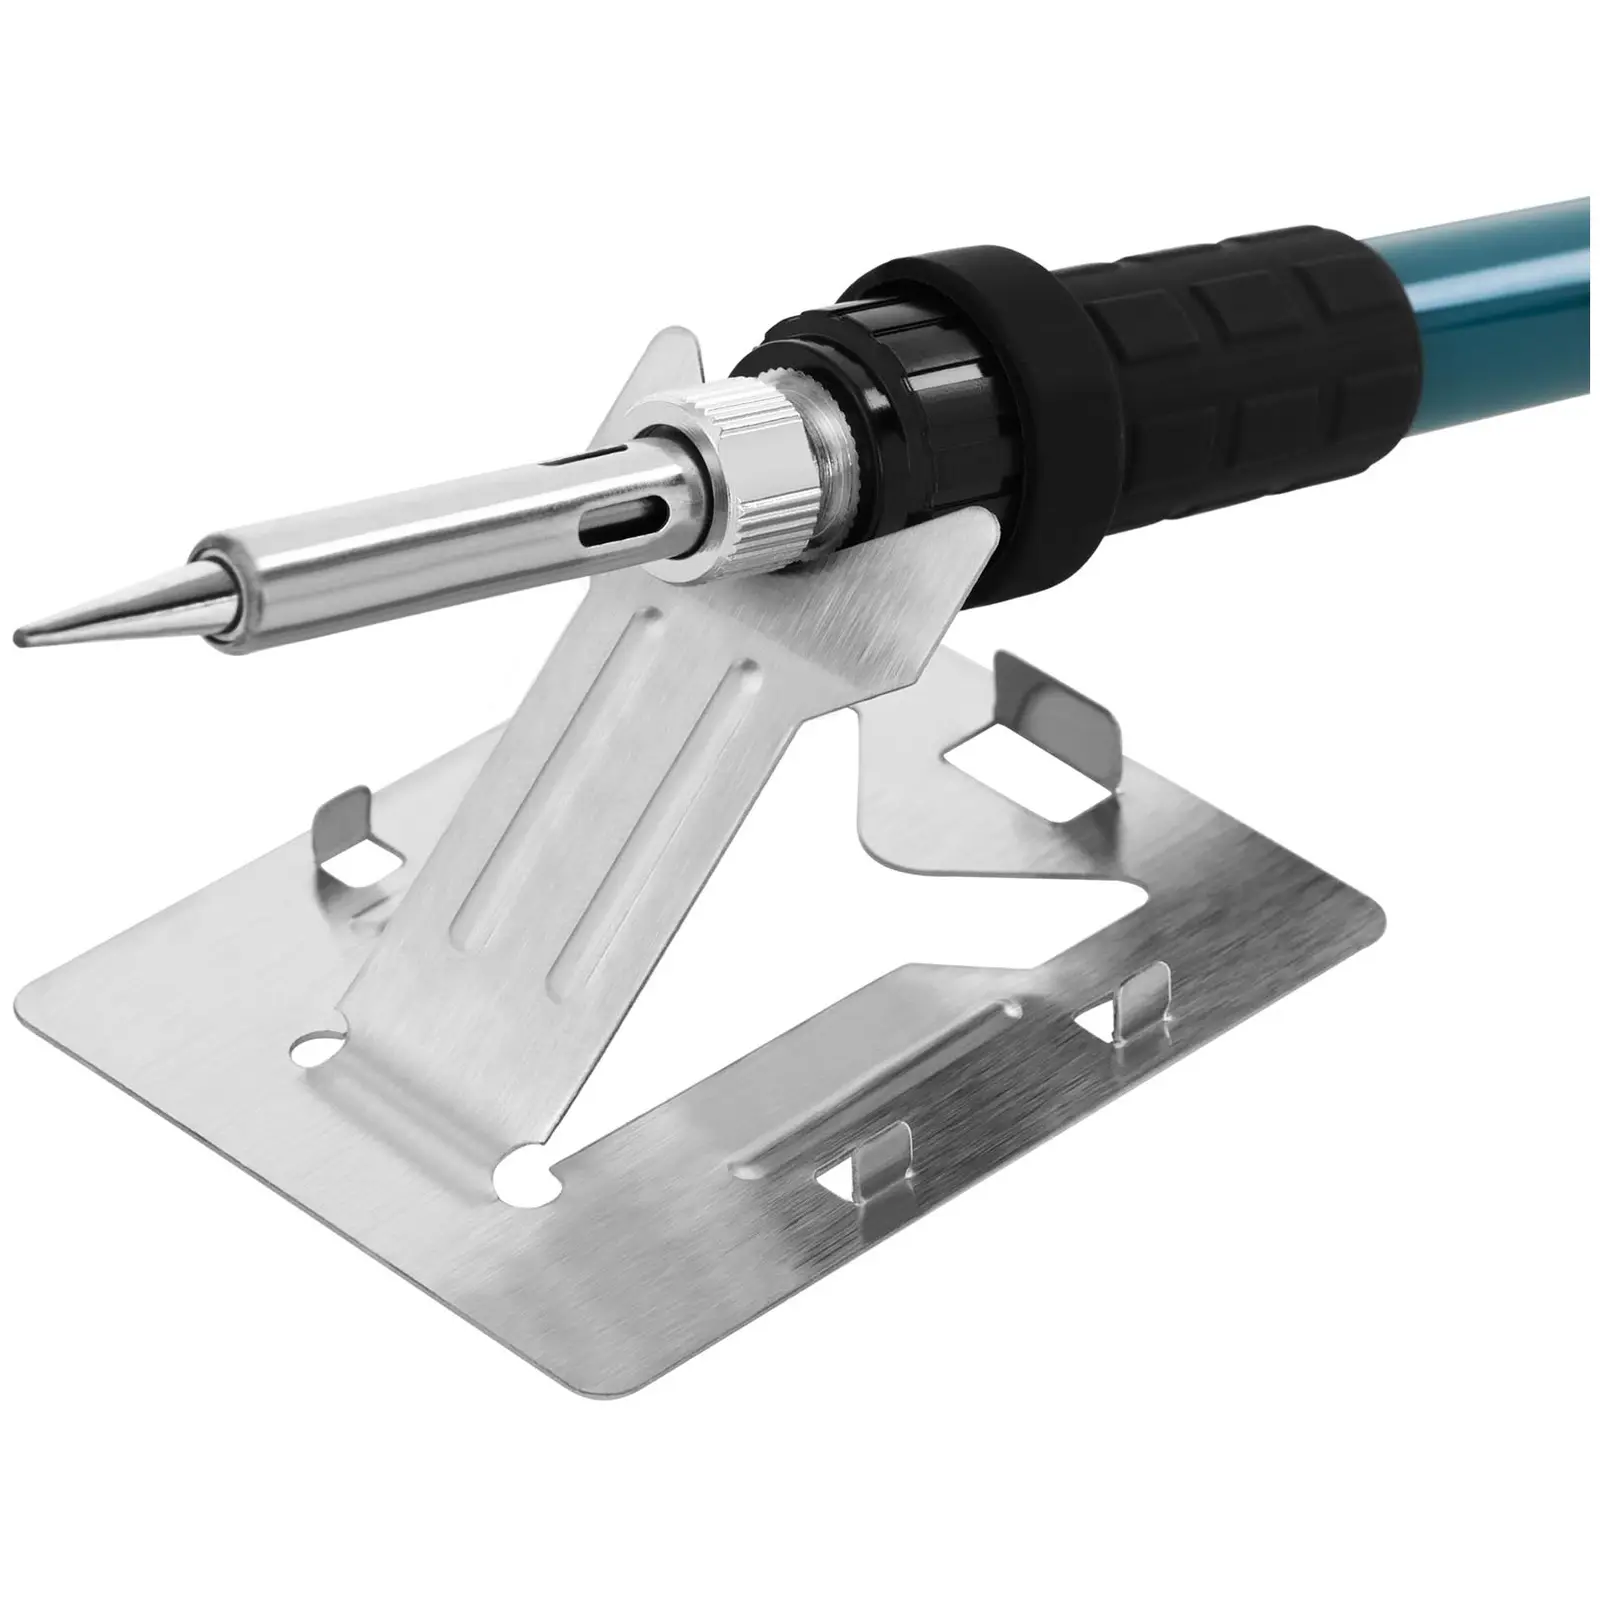 Soldering Iron with Stand